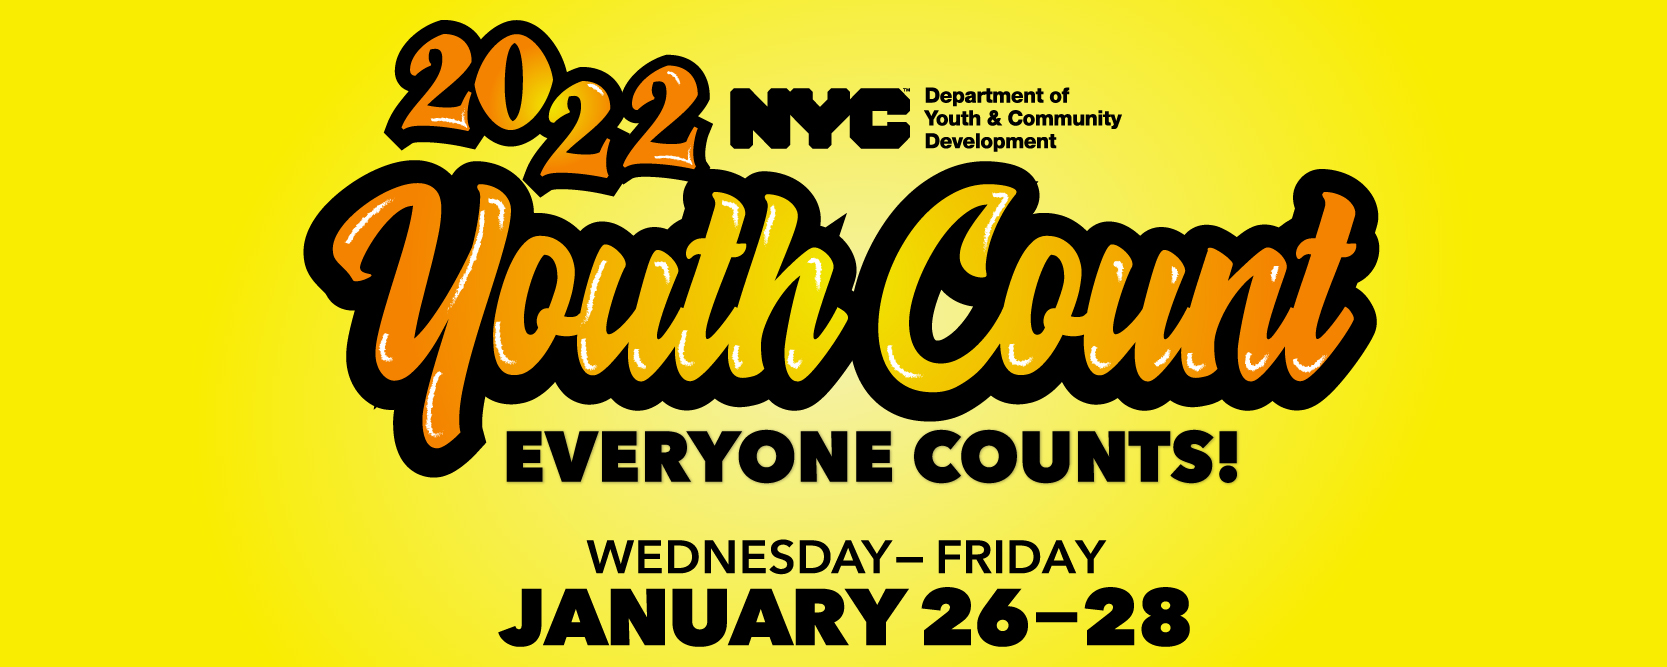 Youth Count 2022